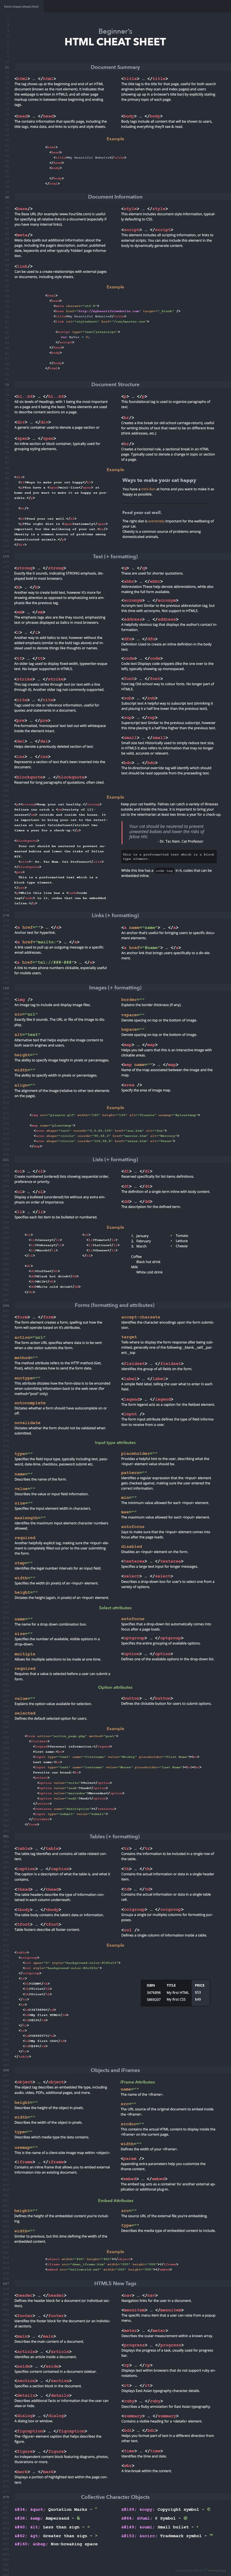 Become A Web Architect With This HTML Cheat Sheet [Infographic]